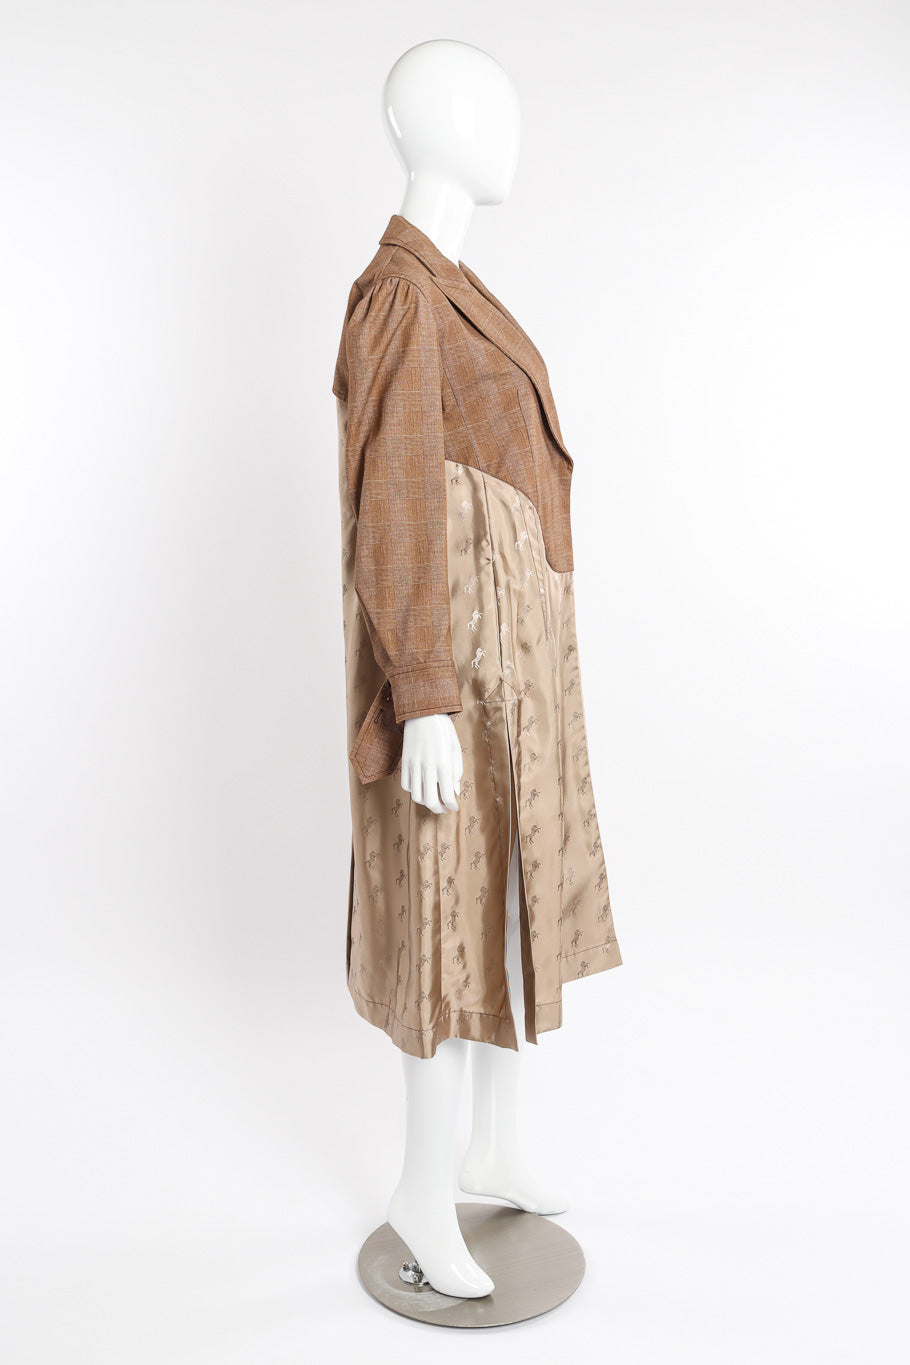 Chloé Equin Print Plaid Trench Coat side view on mannequin @recessla